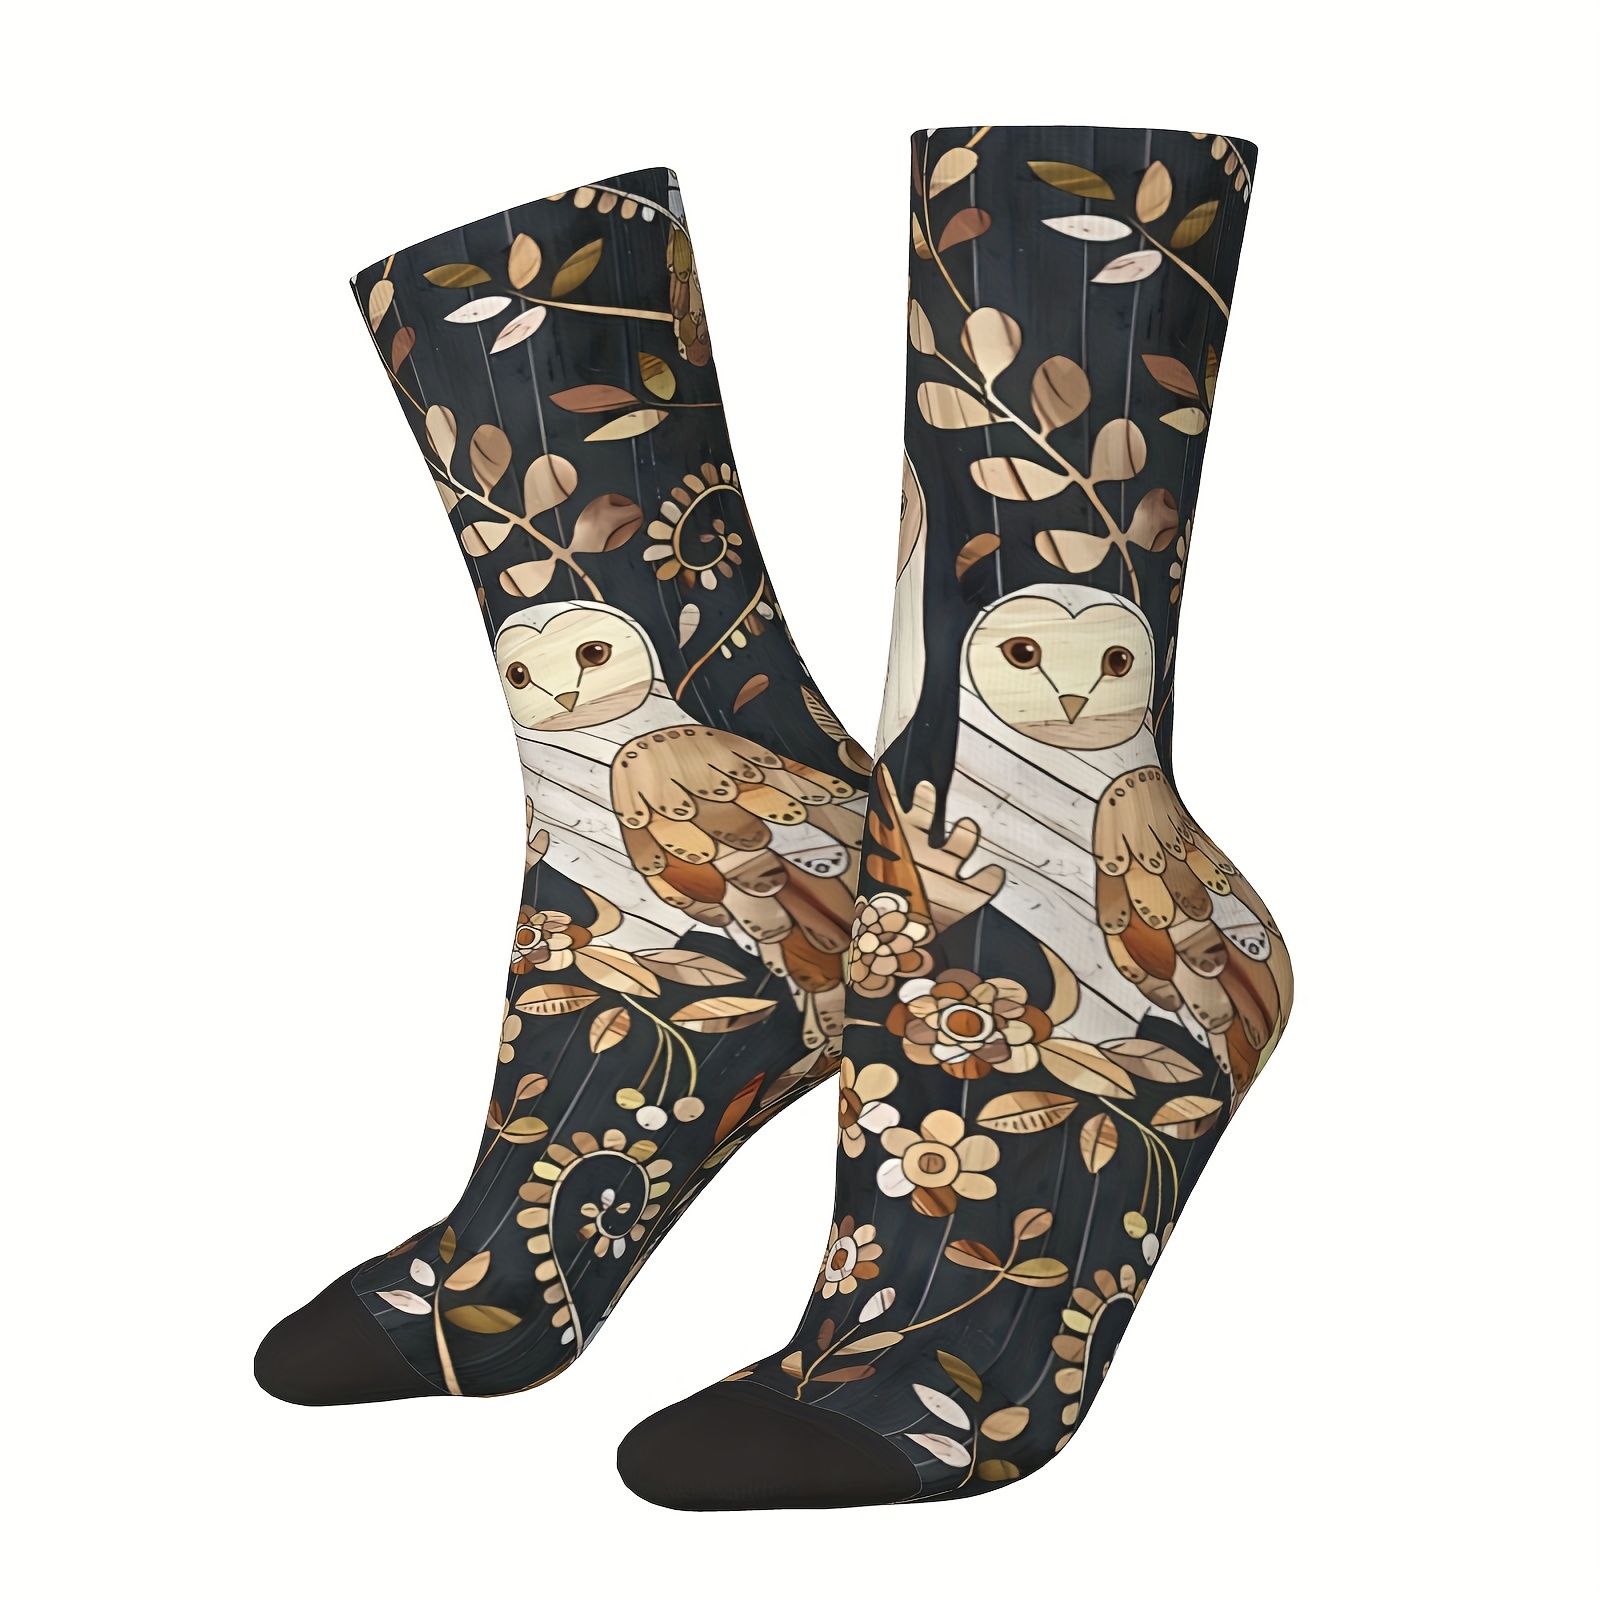 

A Pair Of Men's Owl Pattern Trendy Novelty Crew Socks, Comfy Breathable Casual Soft Socks For Men's Outdoor Activities